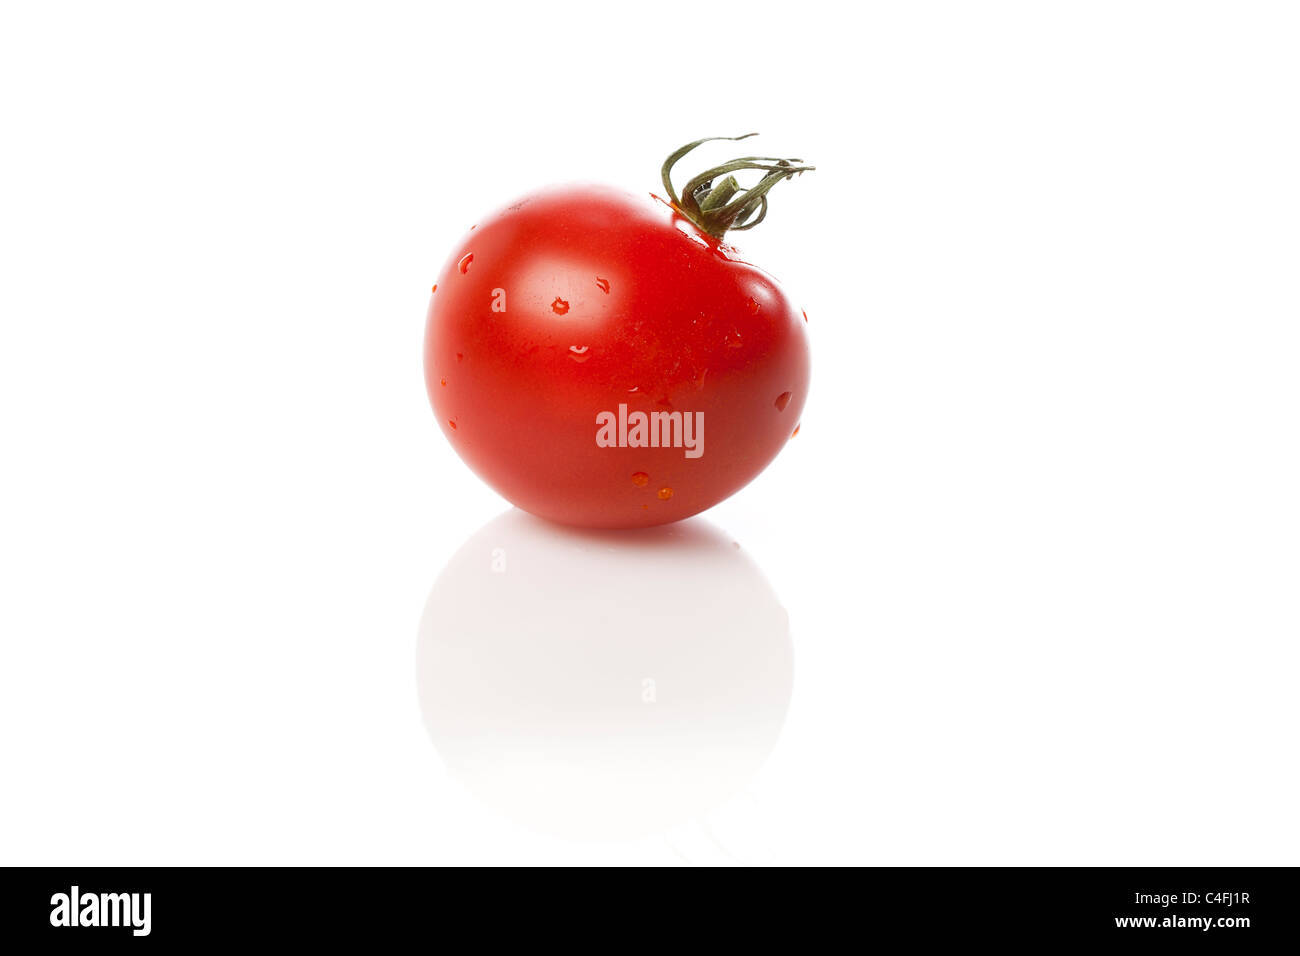 Fresh Red Ripe tomatoes against a white background Stock Photo